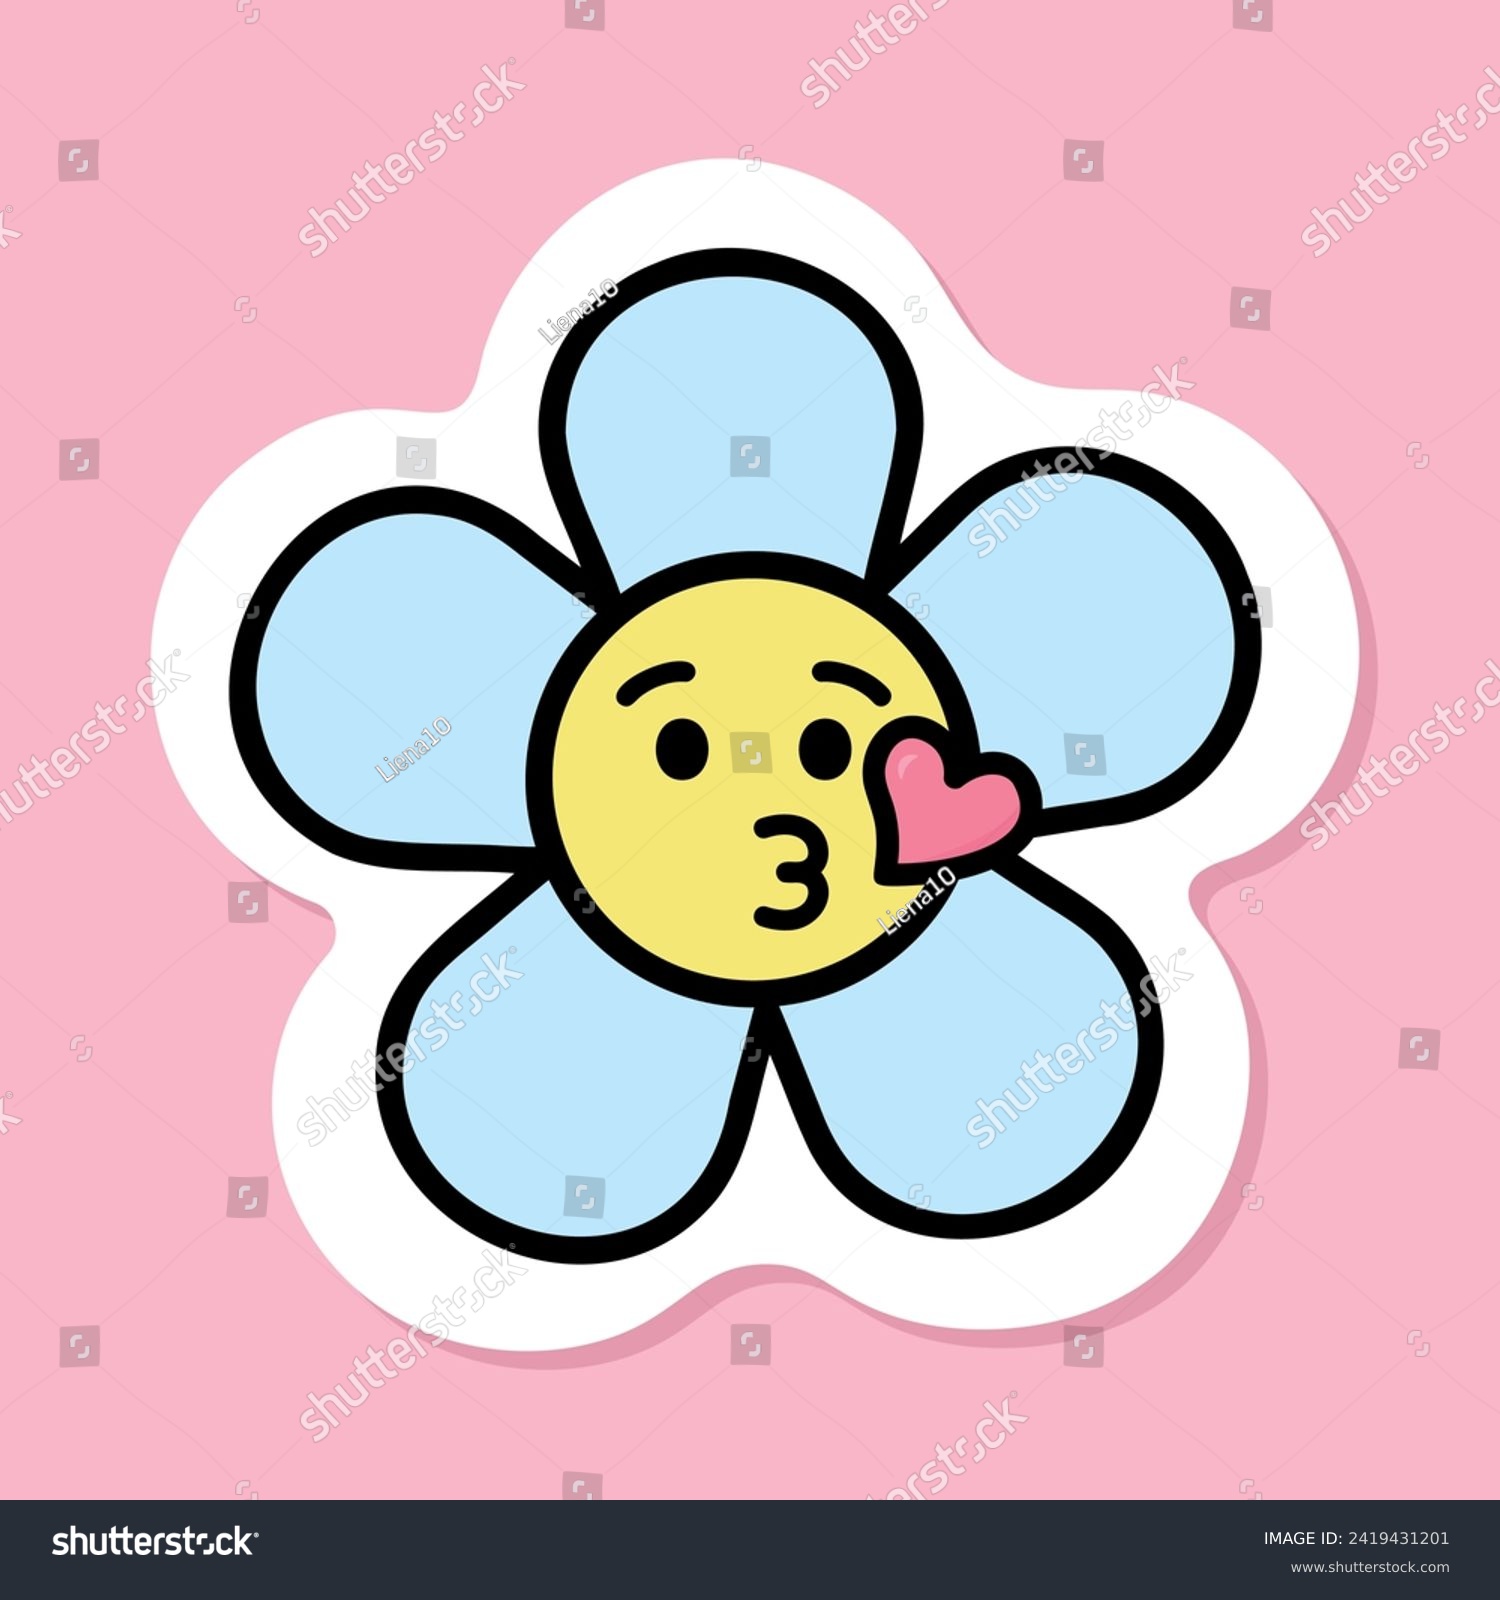 SVG of groovy flower face blowing a kiss sticker, anthropomorphic blue daisy flower with black outline, groovy aesthetic vector design element svg